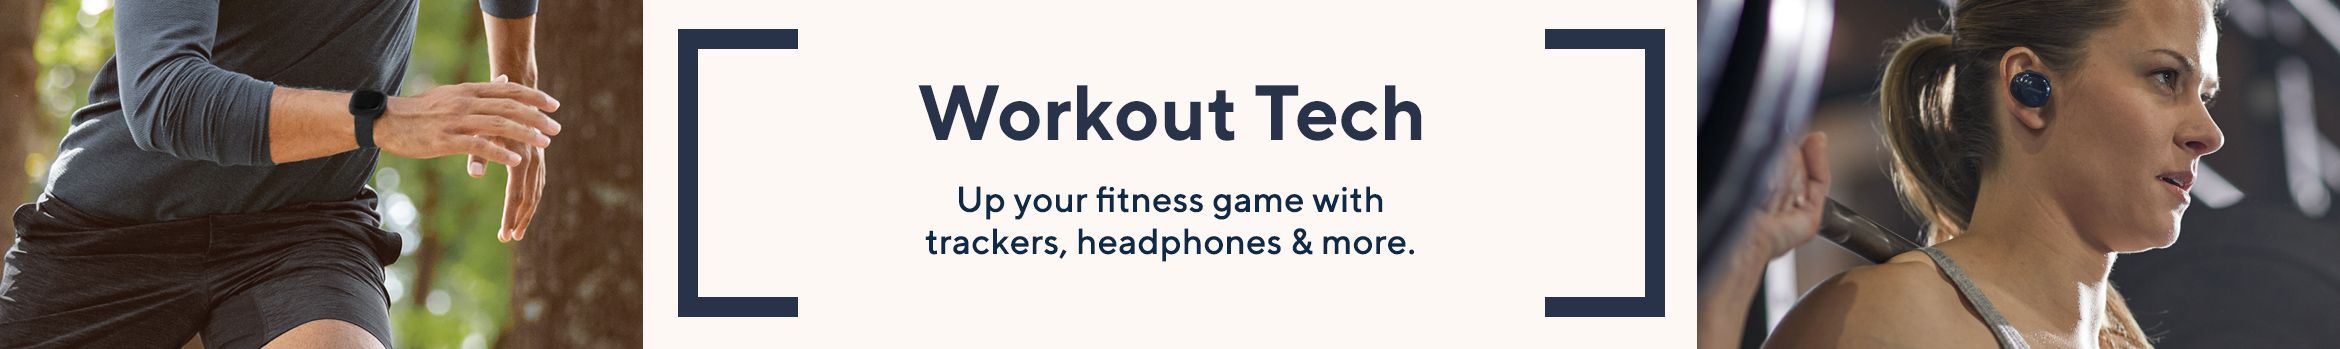 Workout Tech - Up your fitness game with trackers, headphones & more.